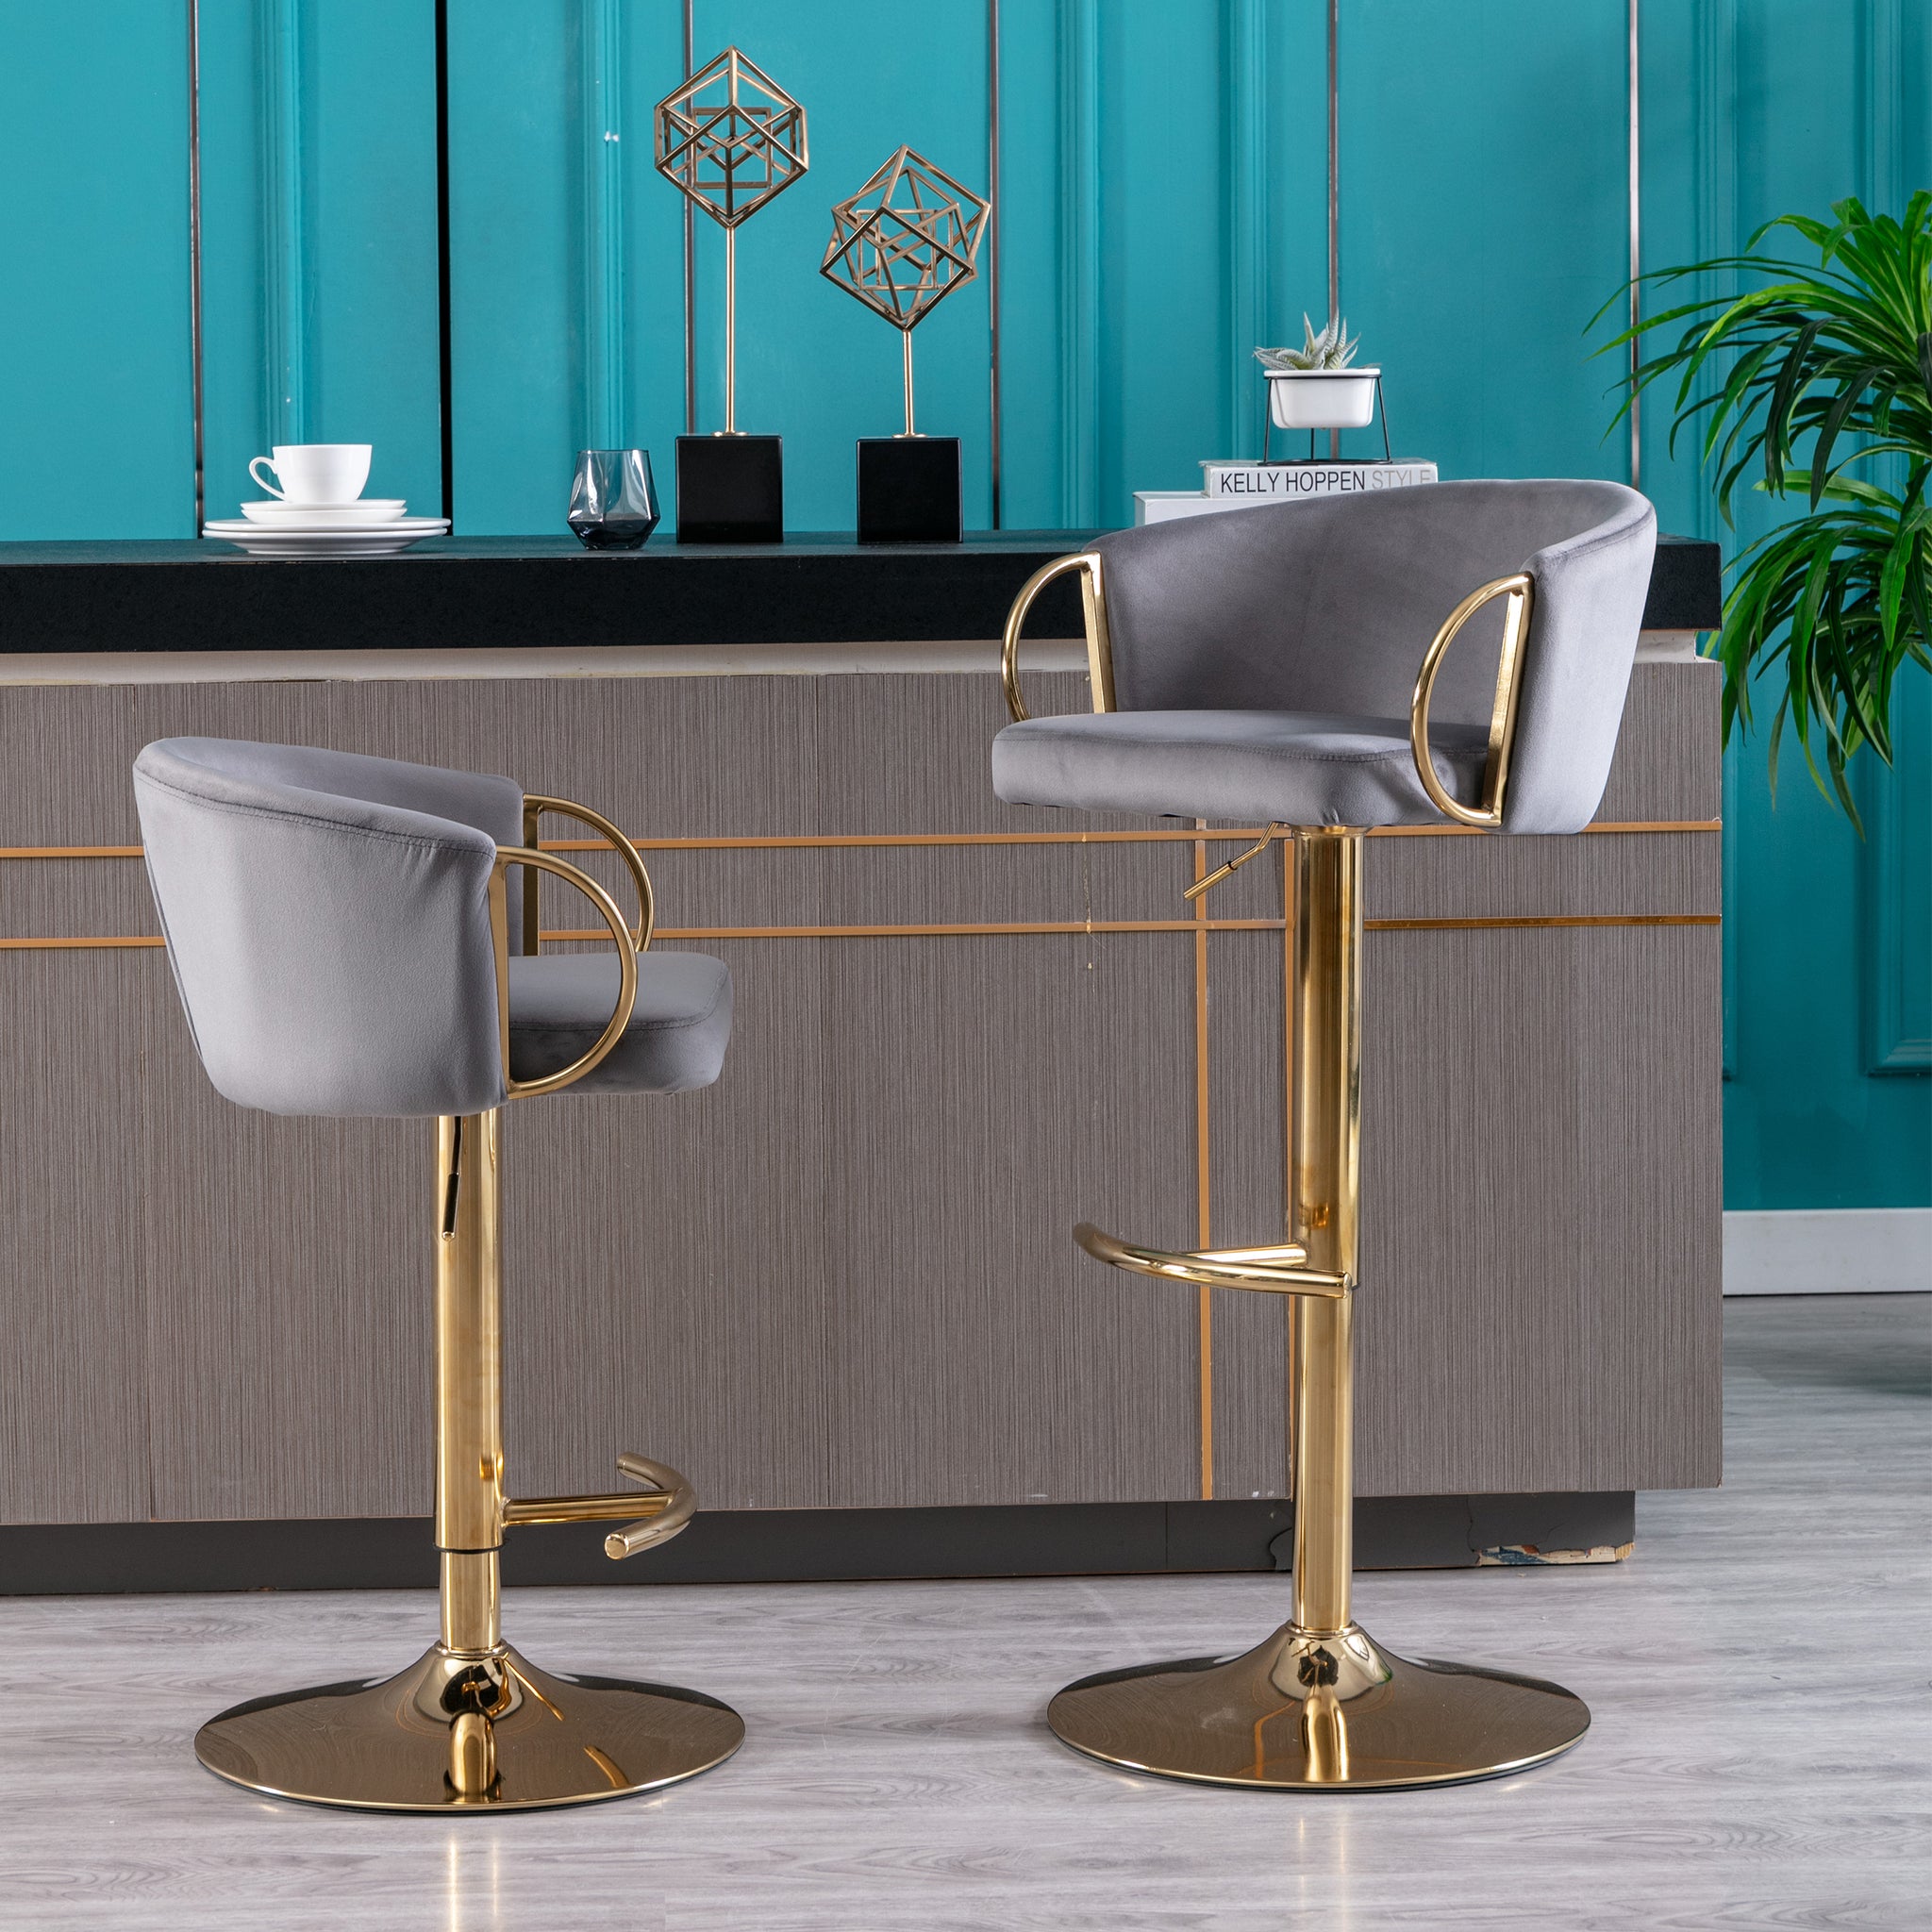 Set of 2 Bar Stools,with Chrome Footrest and Base